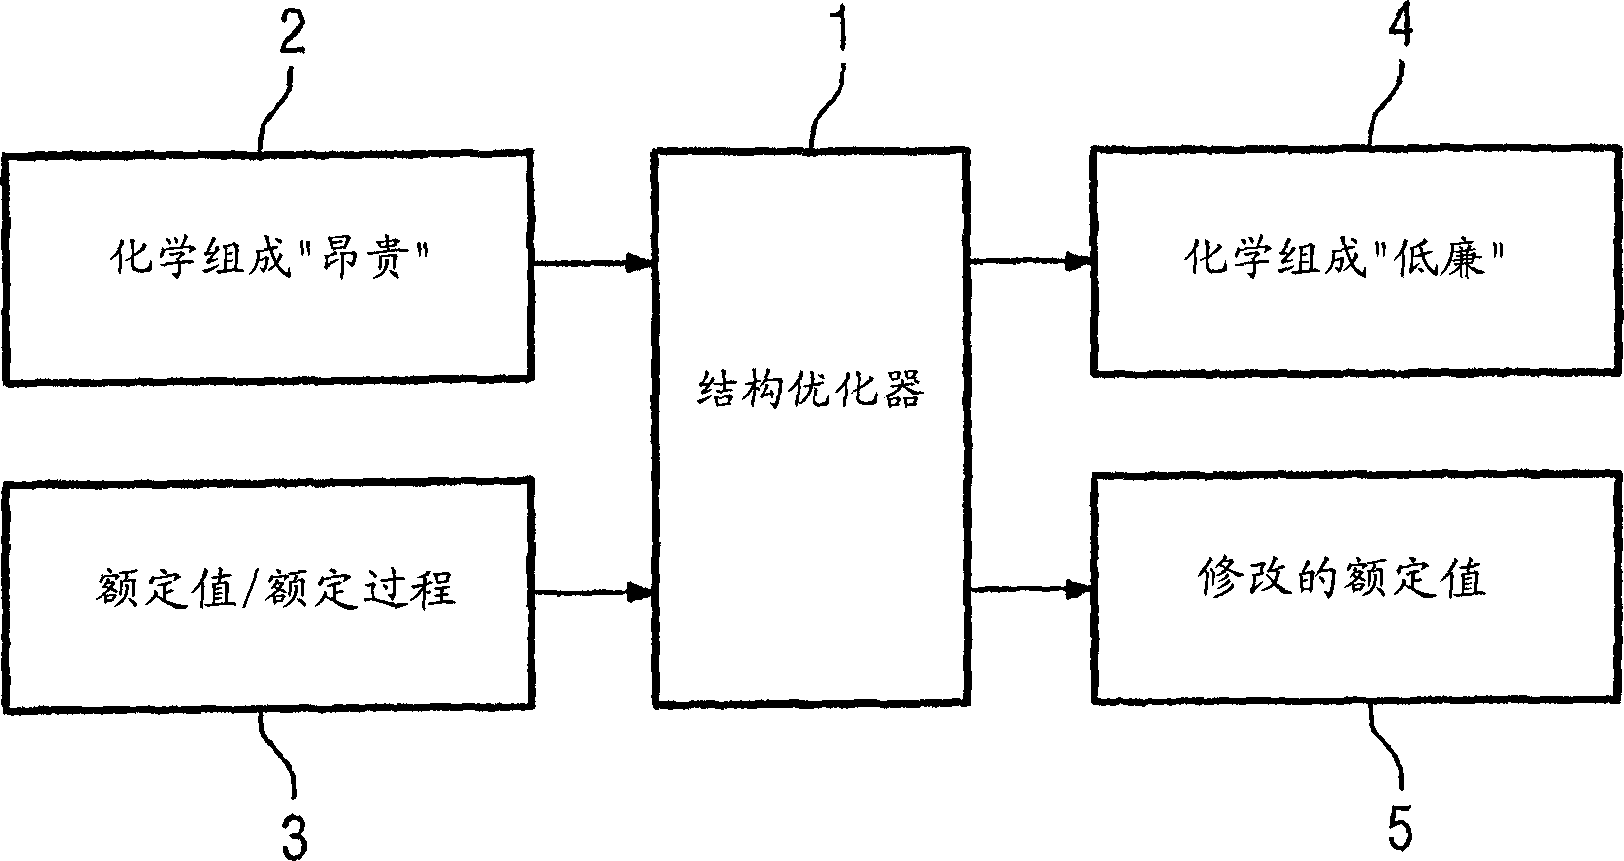 Method and device for controlling an installation for producing steel